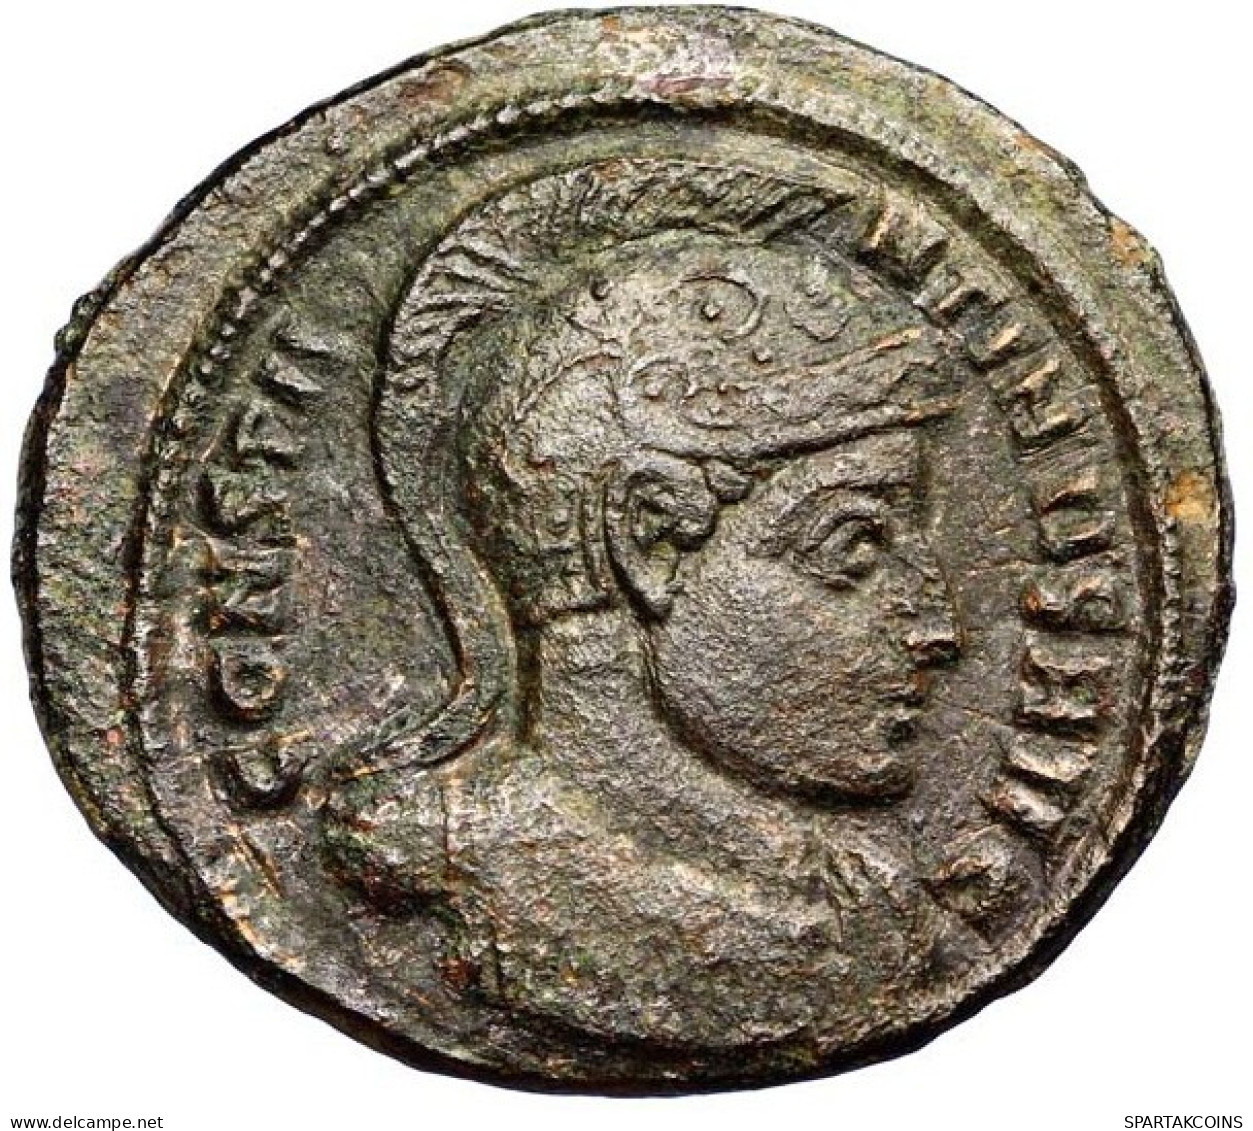 CONSTANTINE I THE GREAT Mint Aquilee 320 Rarity: R2 2.96g/19.5mm #ANC10009.48.U.A - The Christian Empire (307 AD Tot 363 AD)